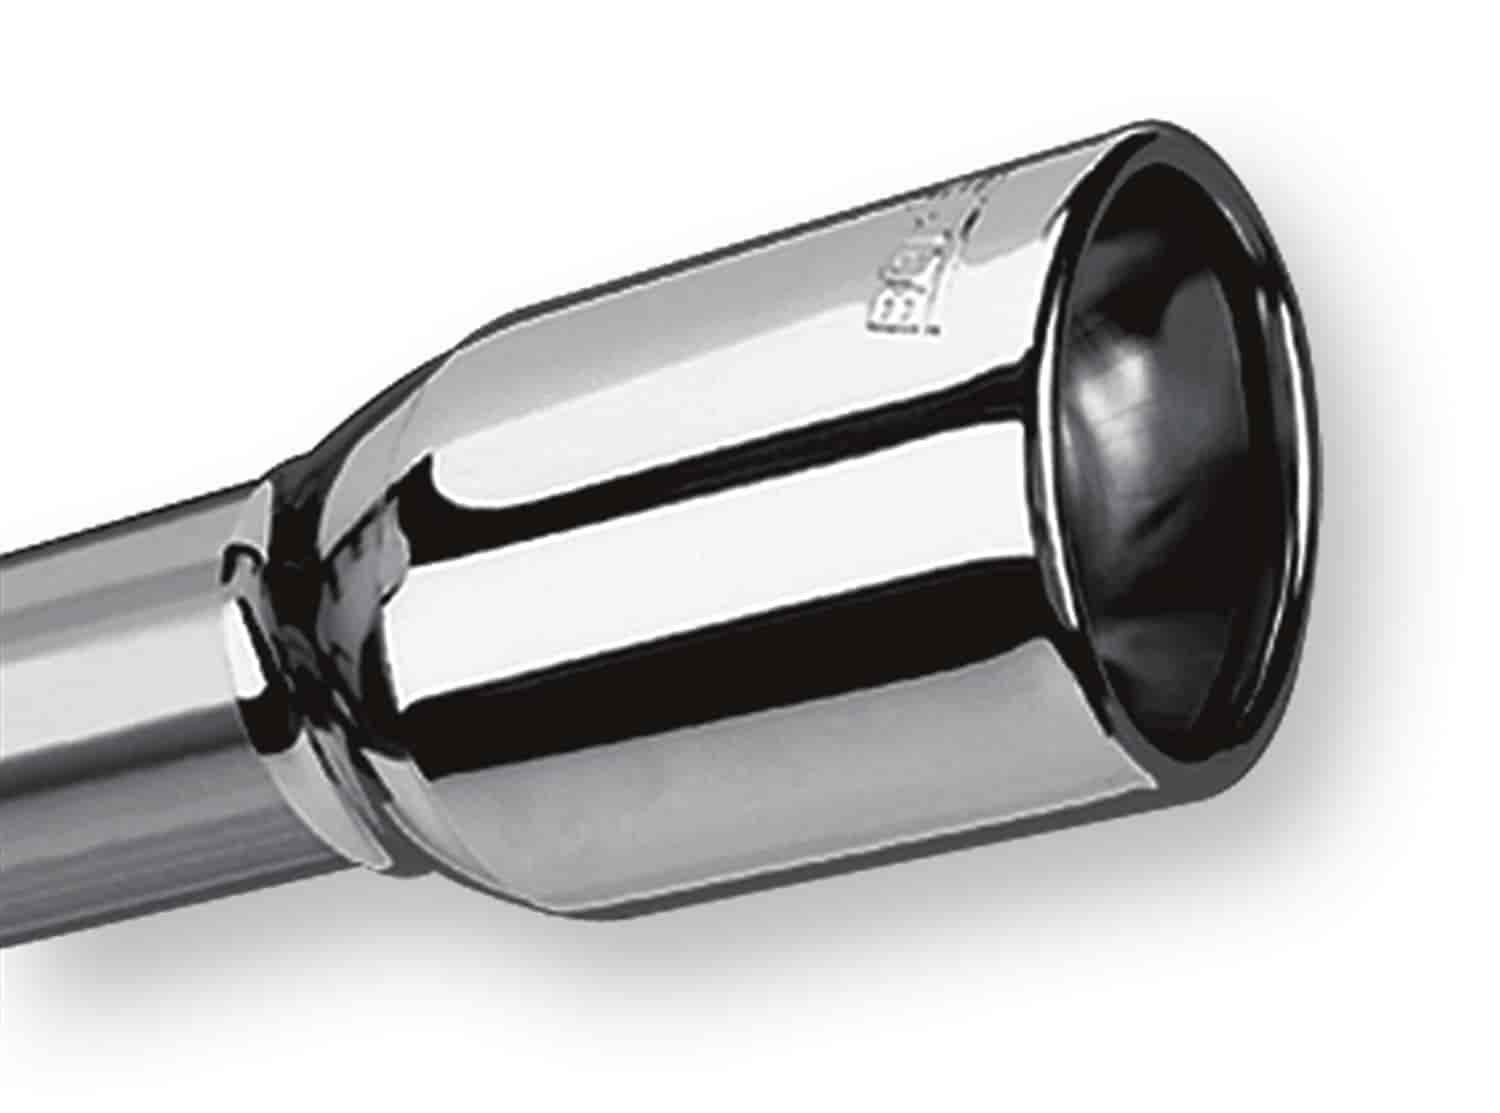 Stainless Steel Exhaust Tip Outlet Size: 3-5/8" x 2-1/2"